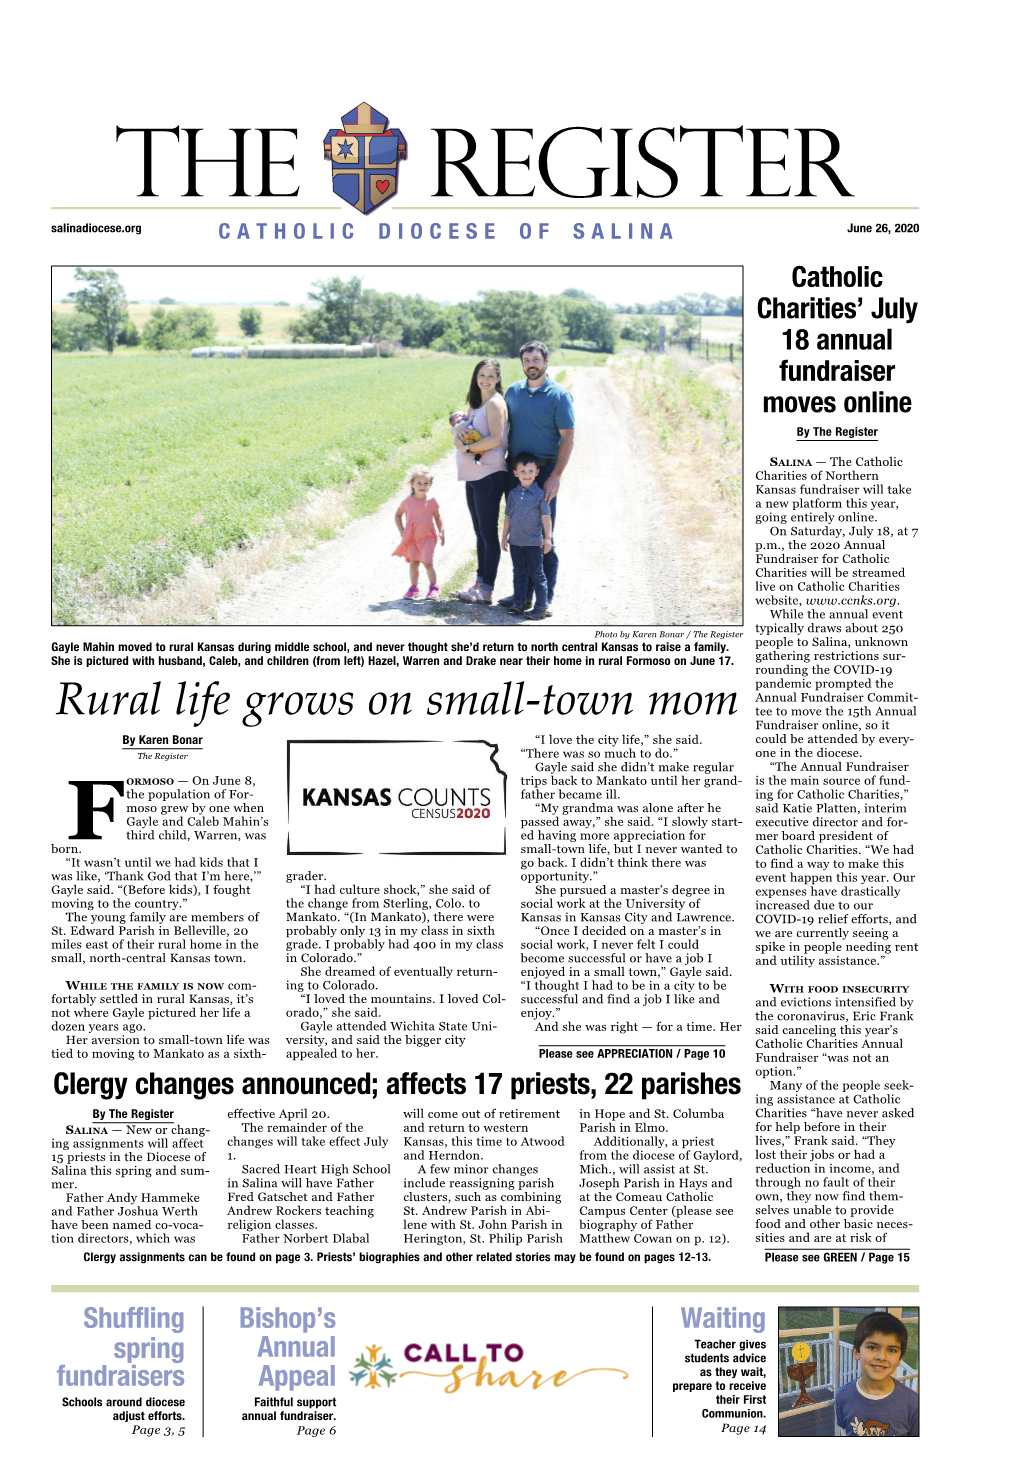 Rural Life Grows on Small-Town Mom Tee to Move the 15Th Annual Fundraiser Online, So It by Karen Bonar “I Love the City Life,” She Said